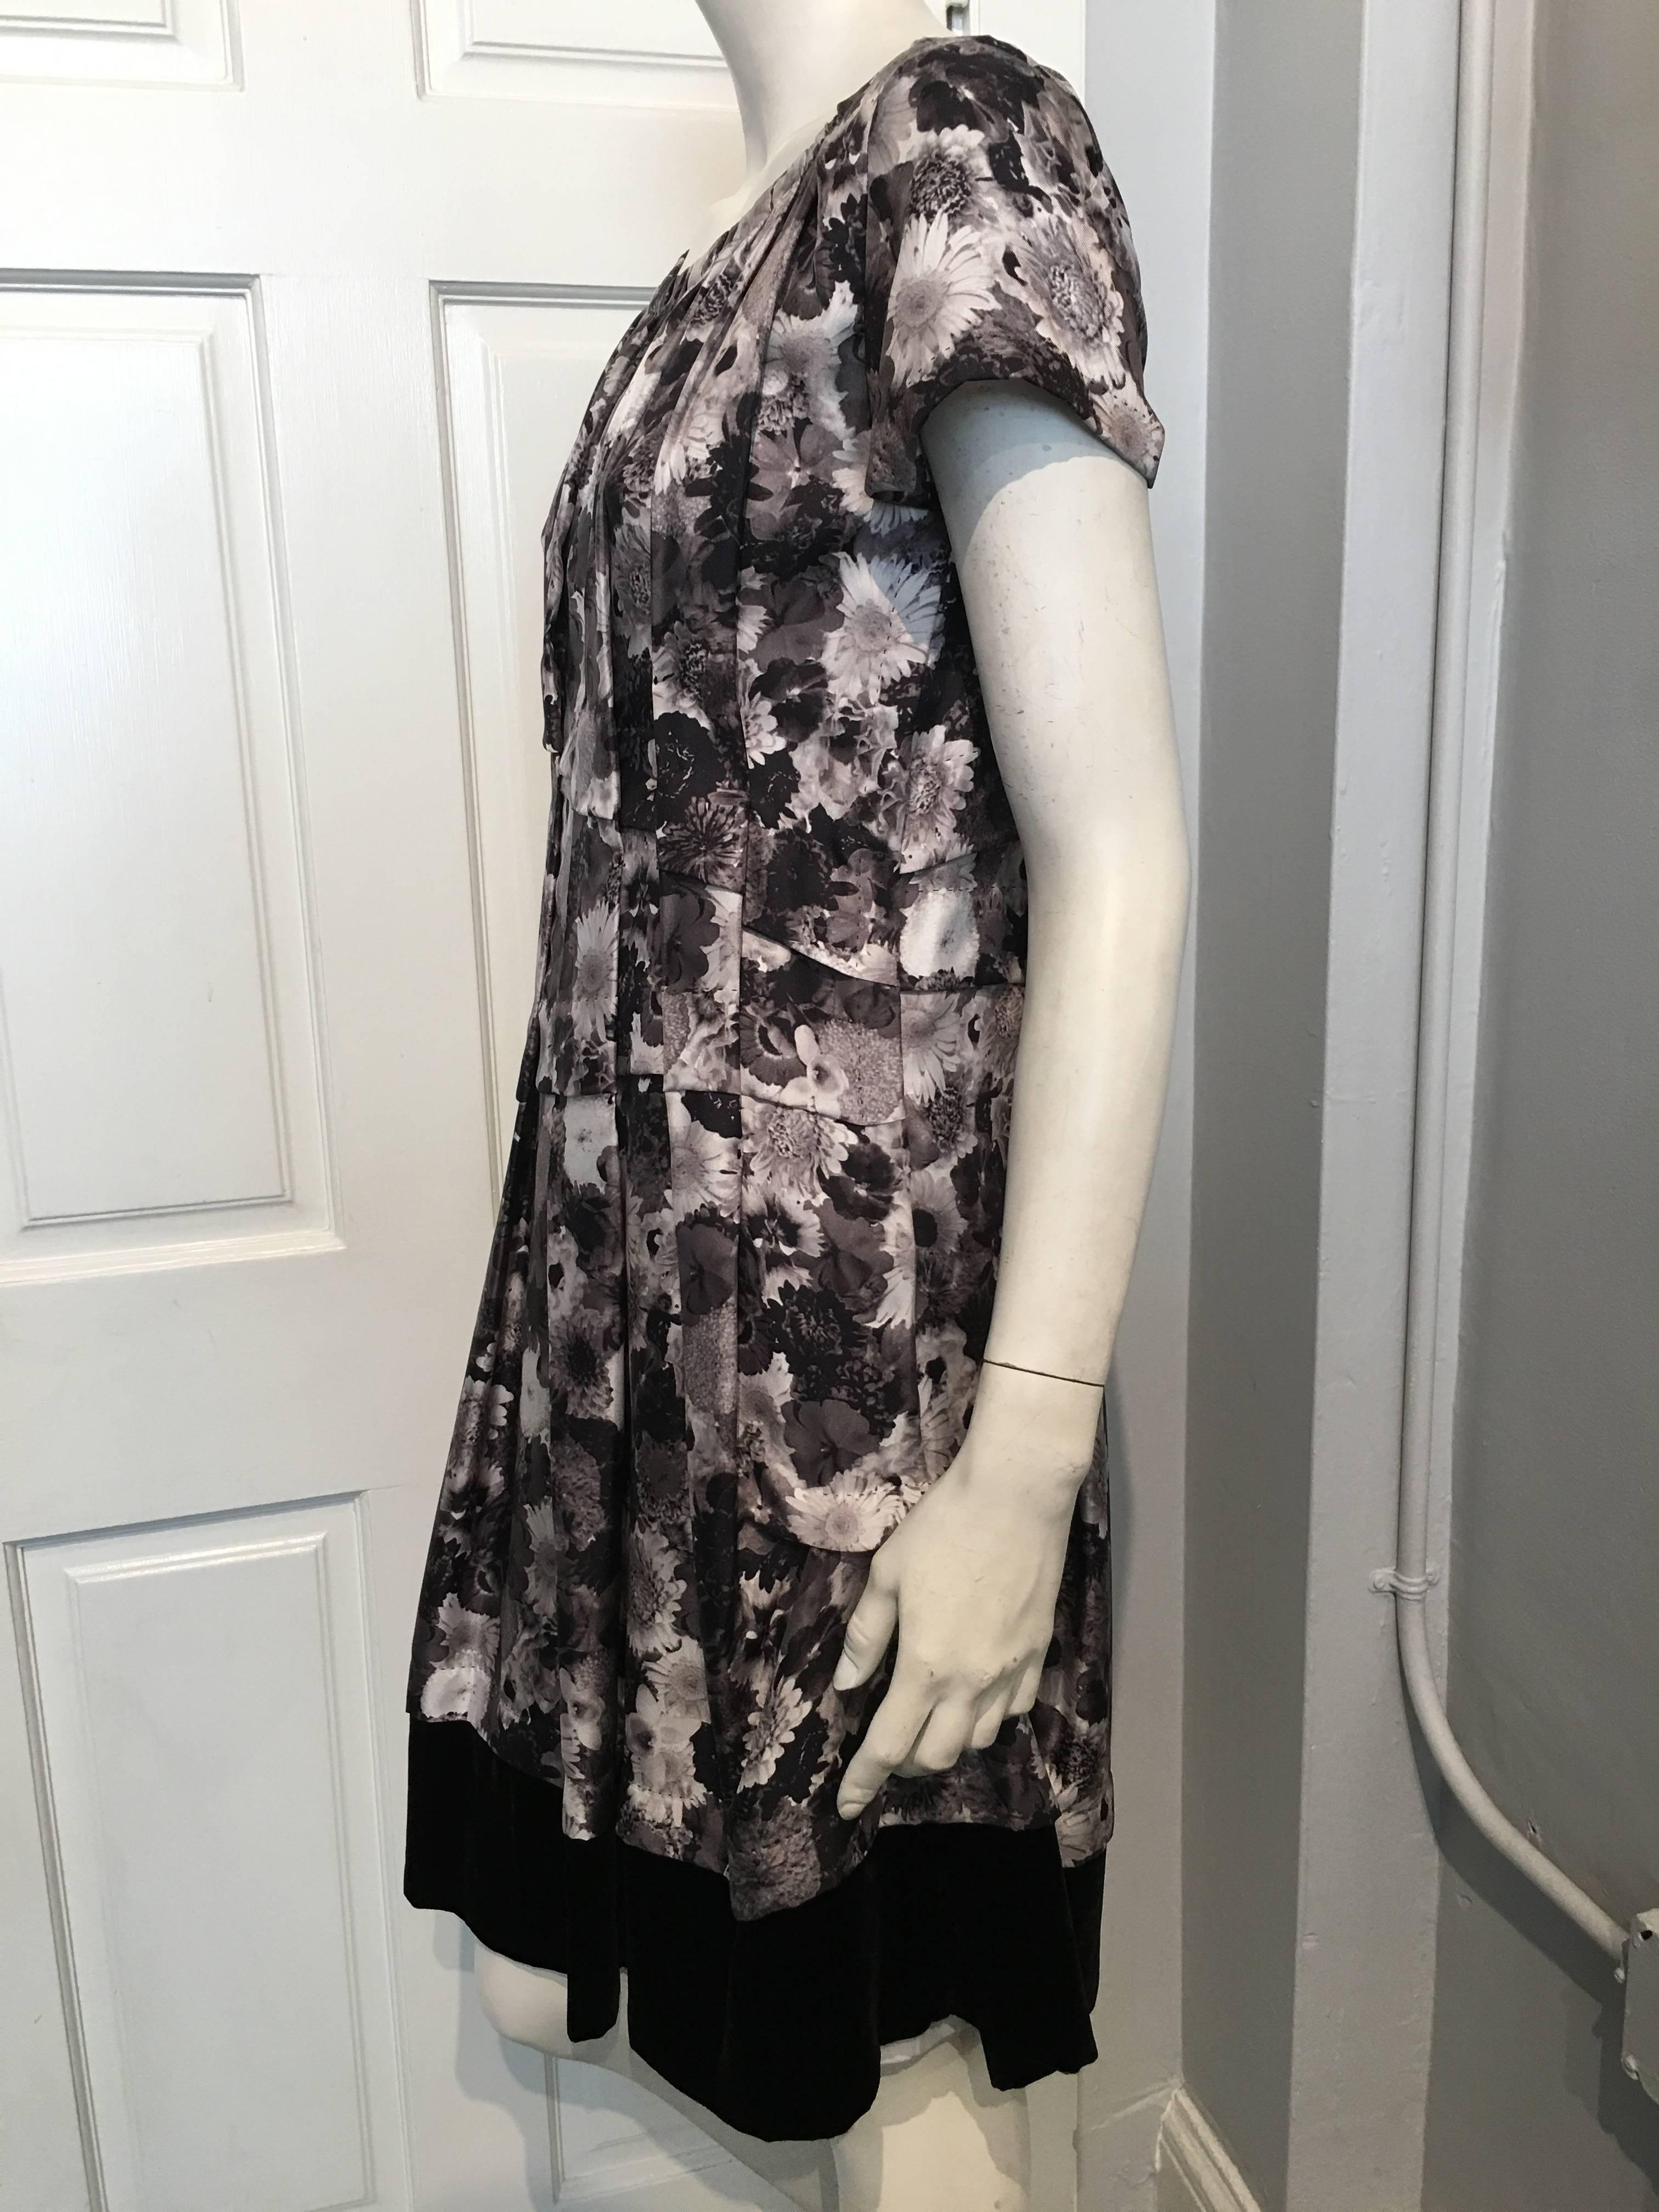 Louis Vuitton grey short sleeve floral dress with black velvet trim at hem. The dress has a sheer floral lining in the same grey color palette, and closes along the left side with a set of snap closures. 